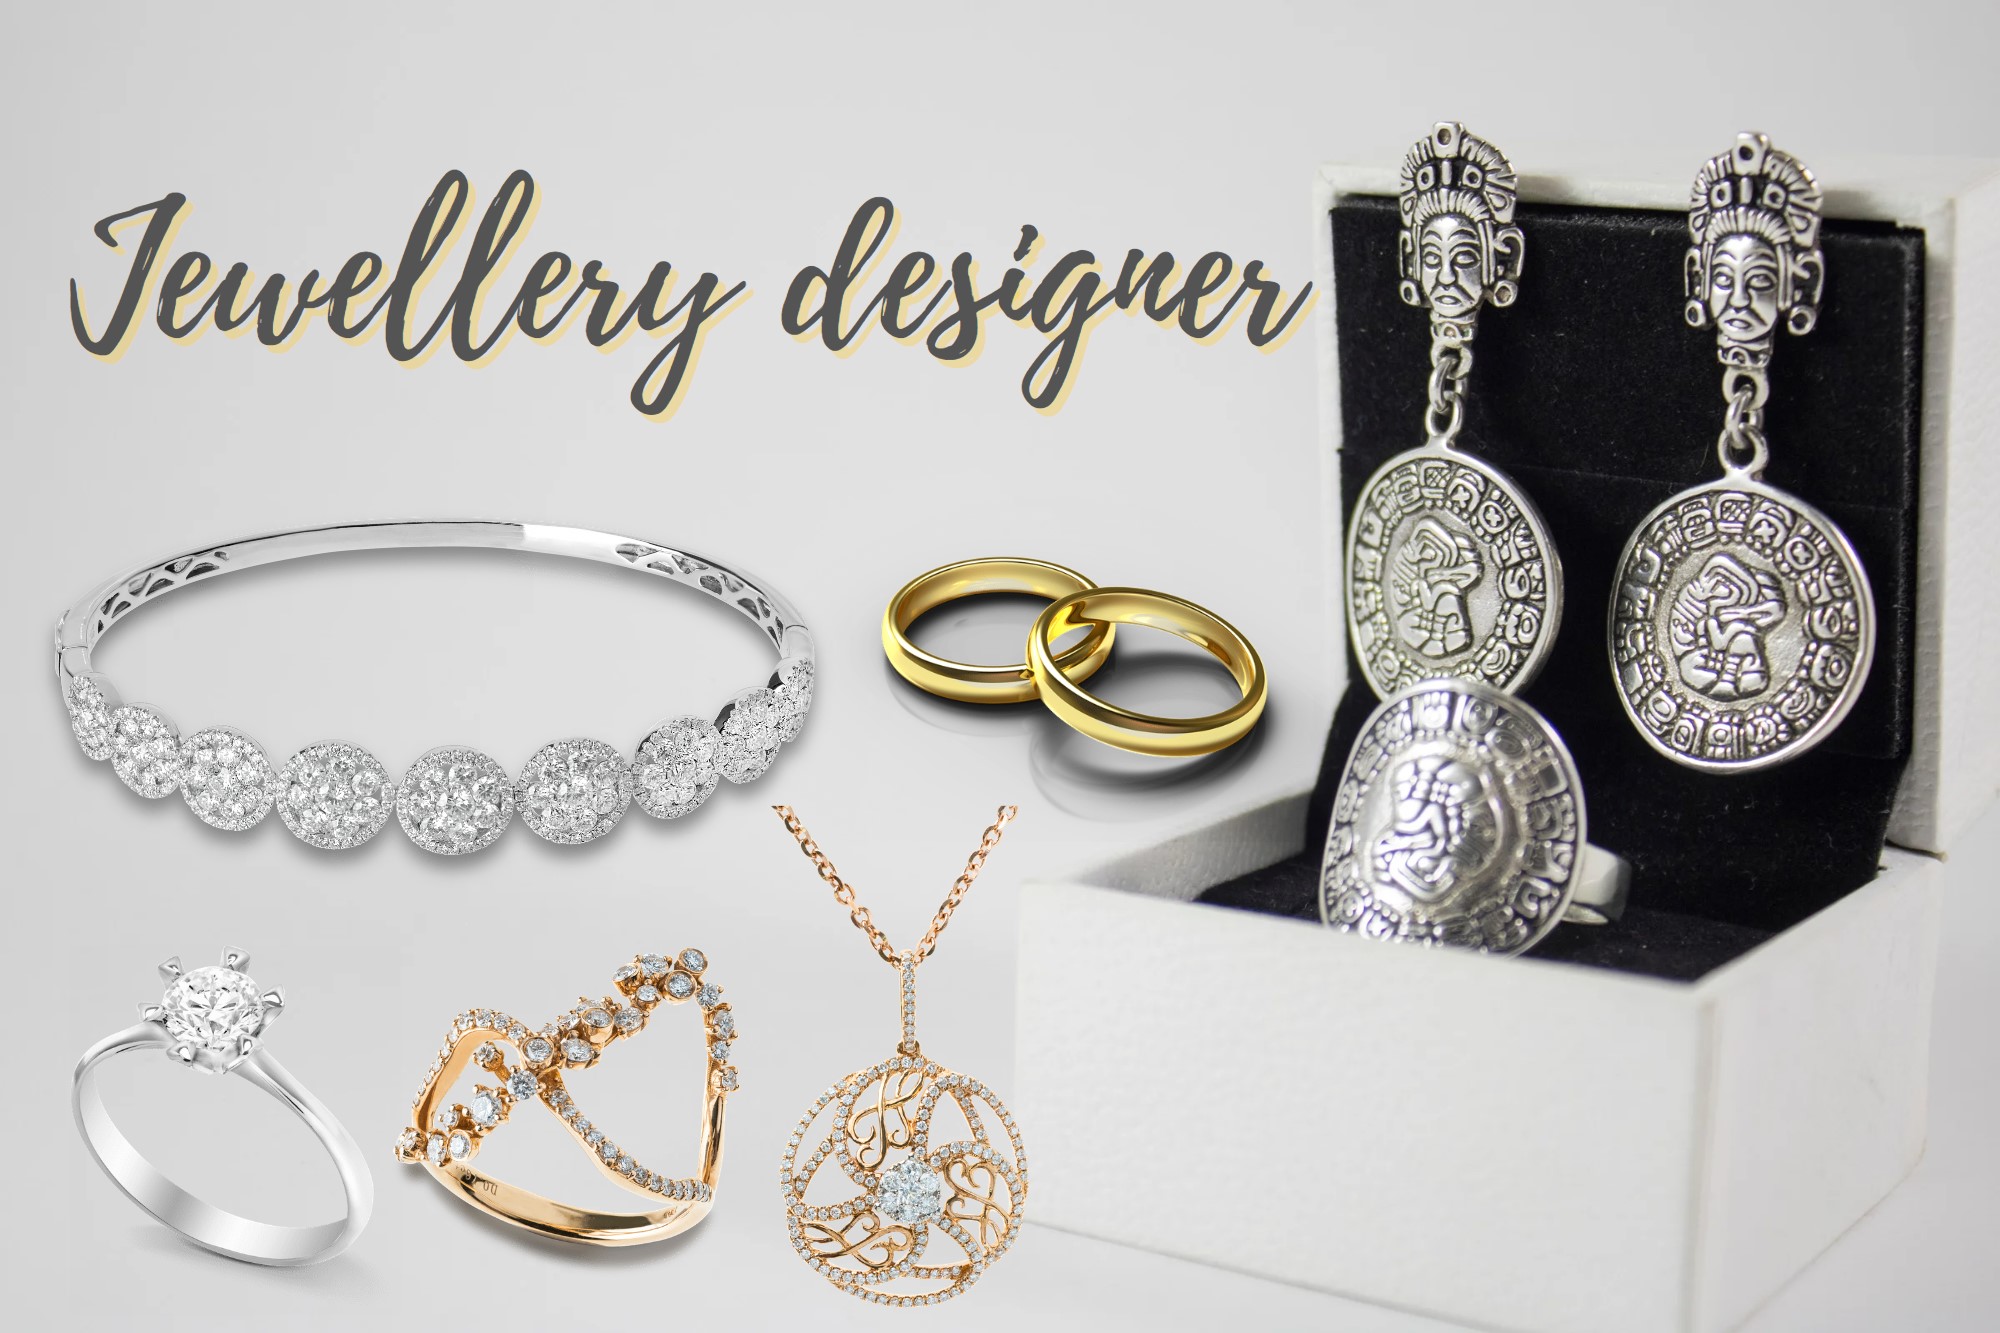 Develop Your Jewellery Design Skills with the Right Course: Subjects & Syllabus